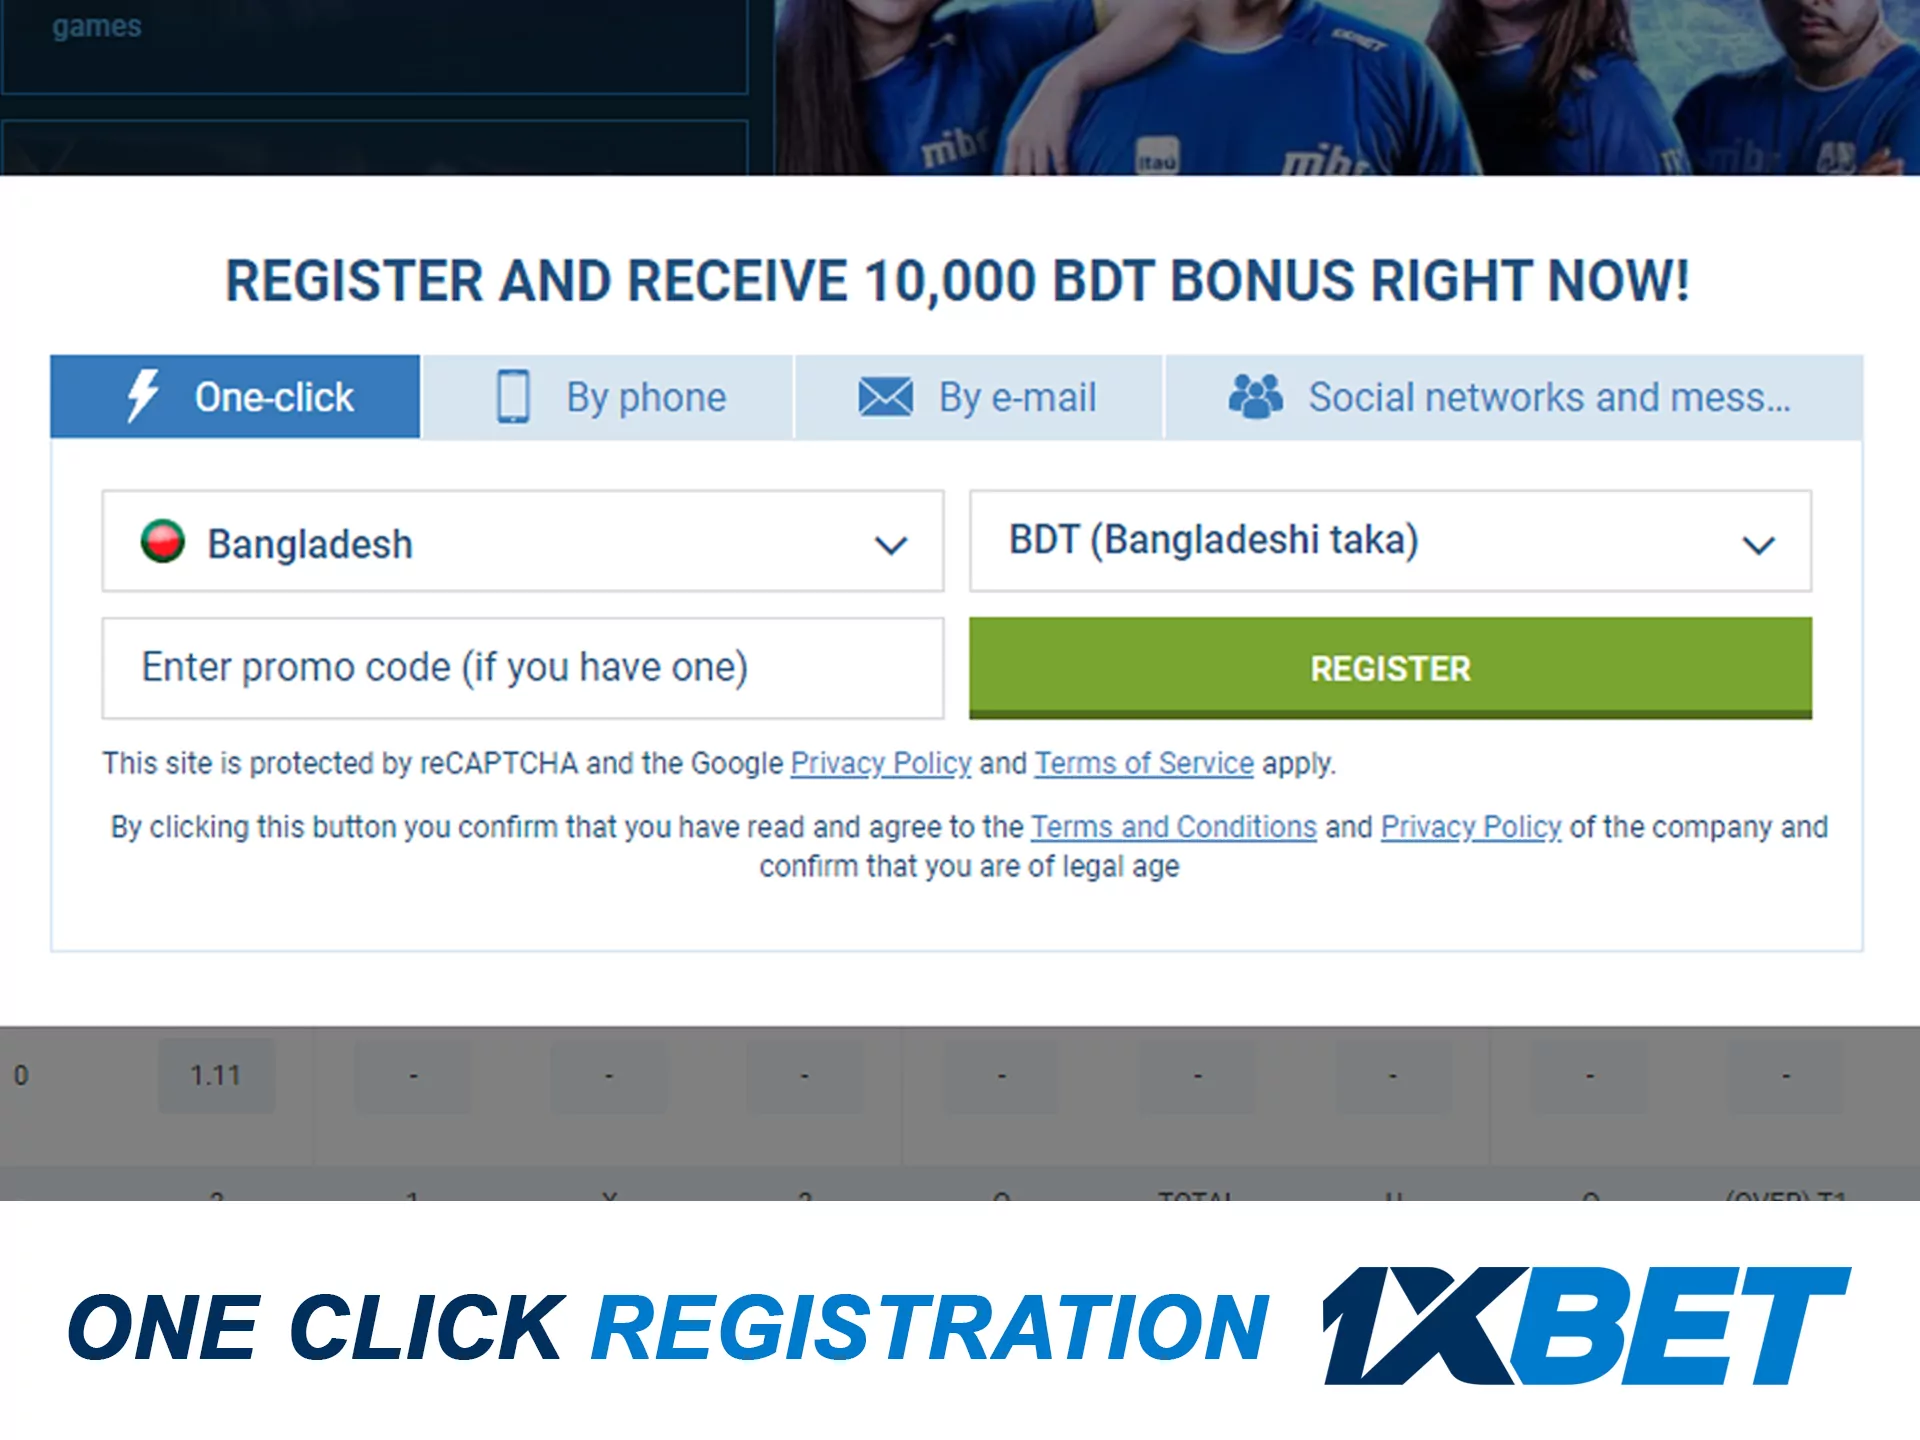 You can registrate at 1xbet with one click.